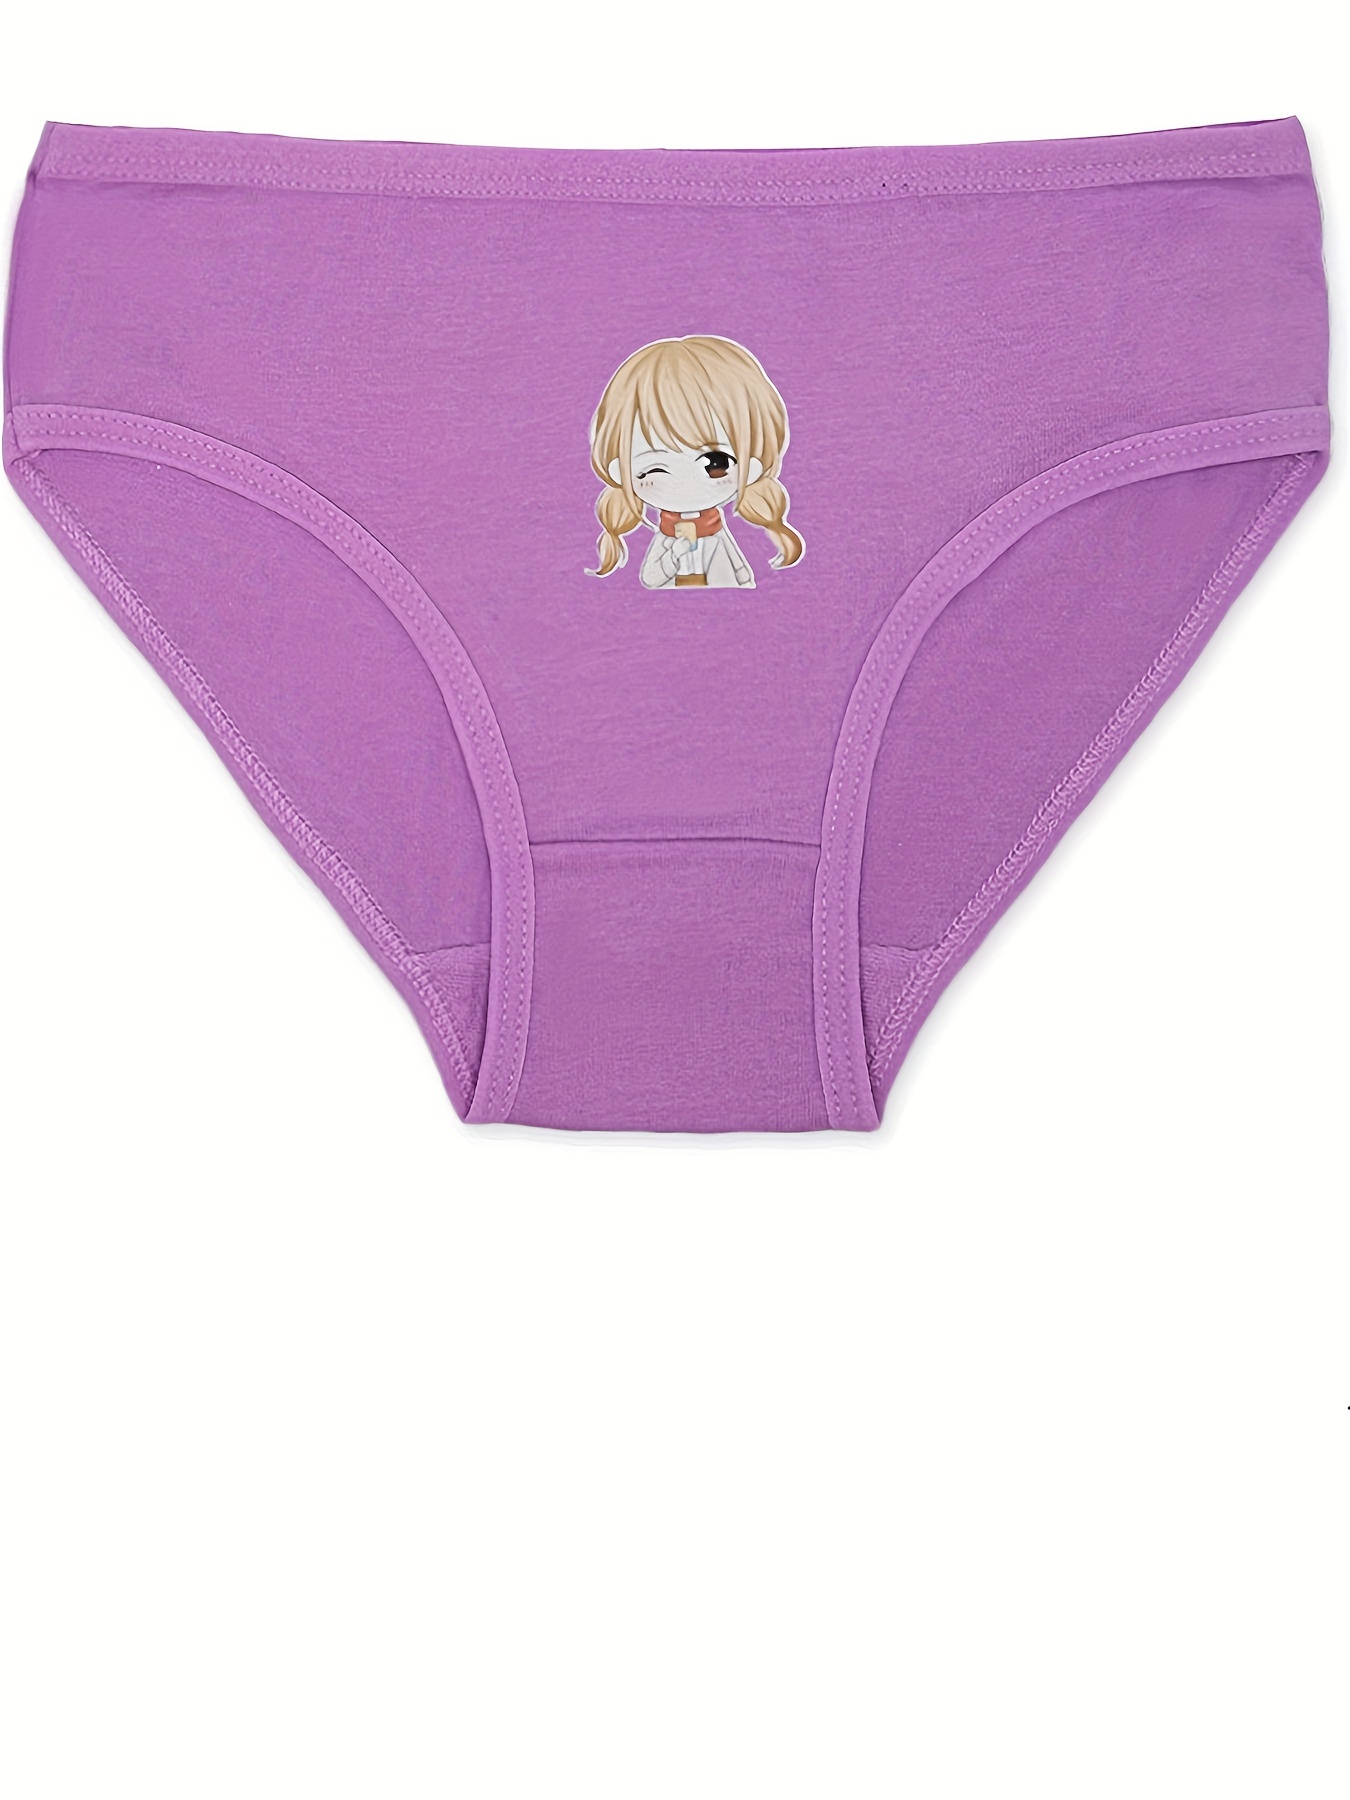 Anime Girl,The Captivating Key Underpants Breathbale Panties Male